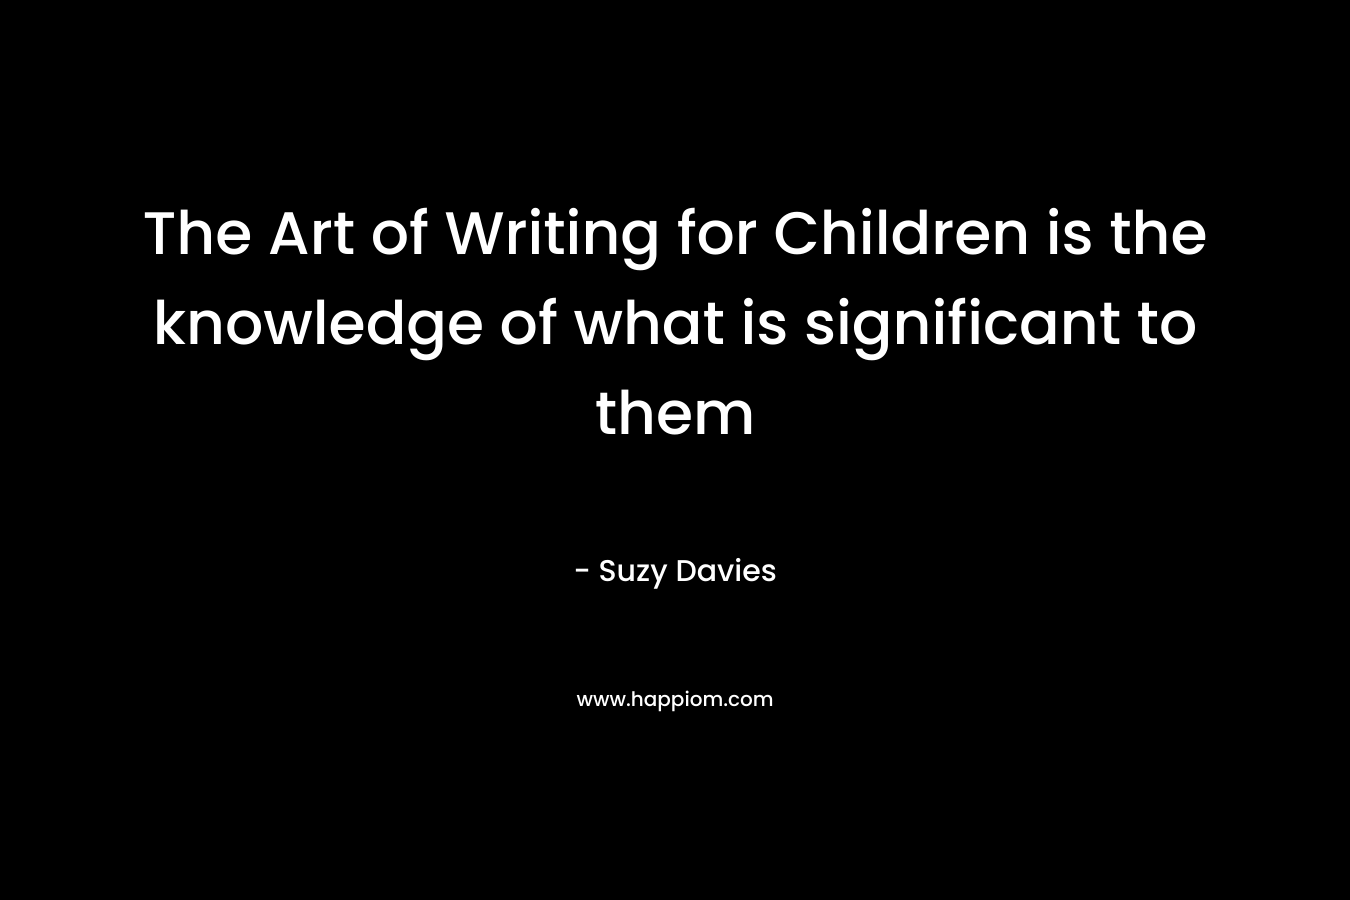 The Art of Writing for Children is the knowledge of what is significant to them